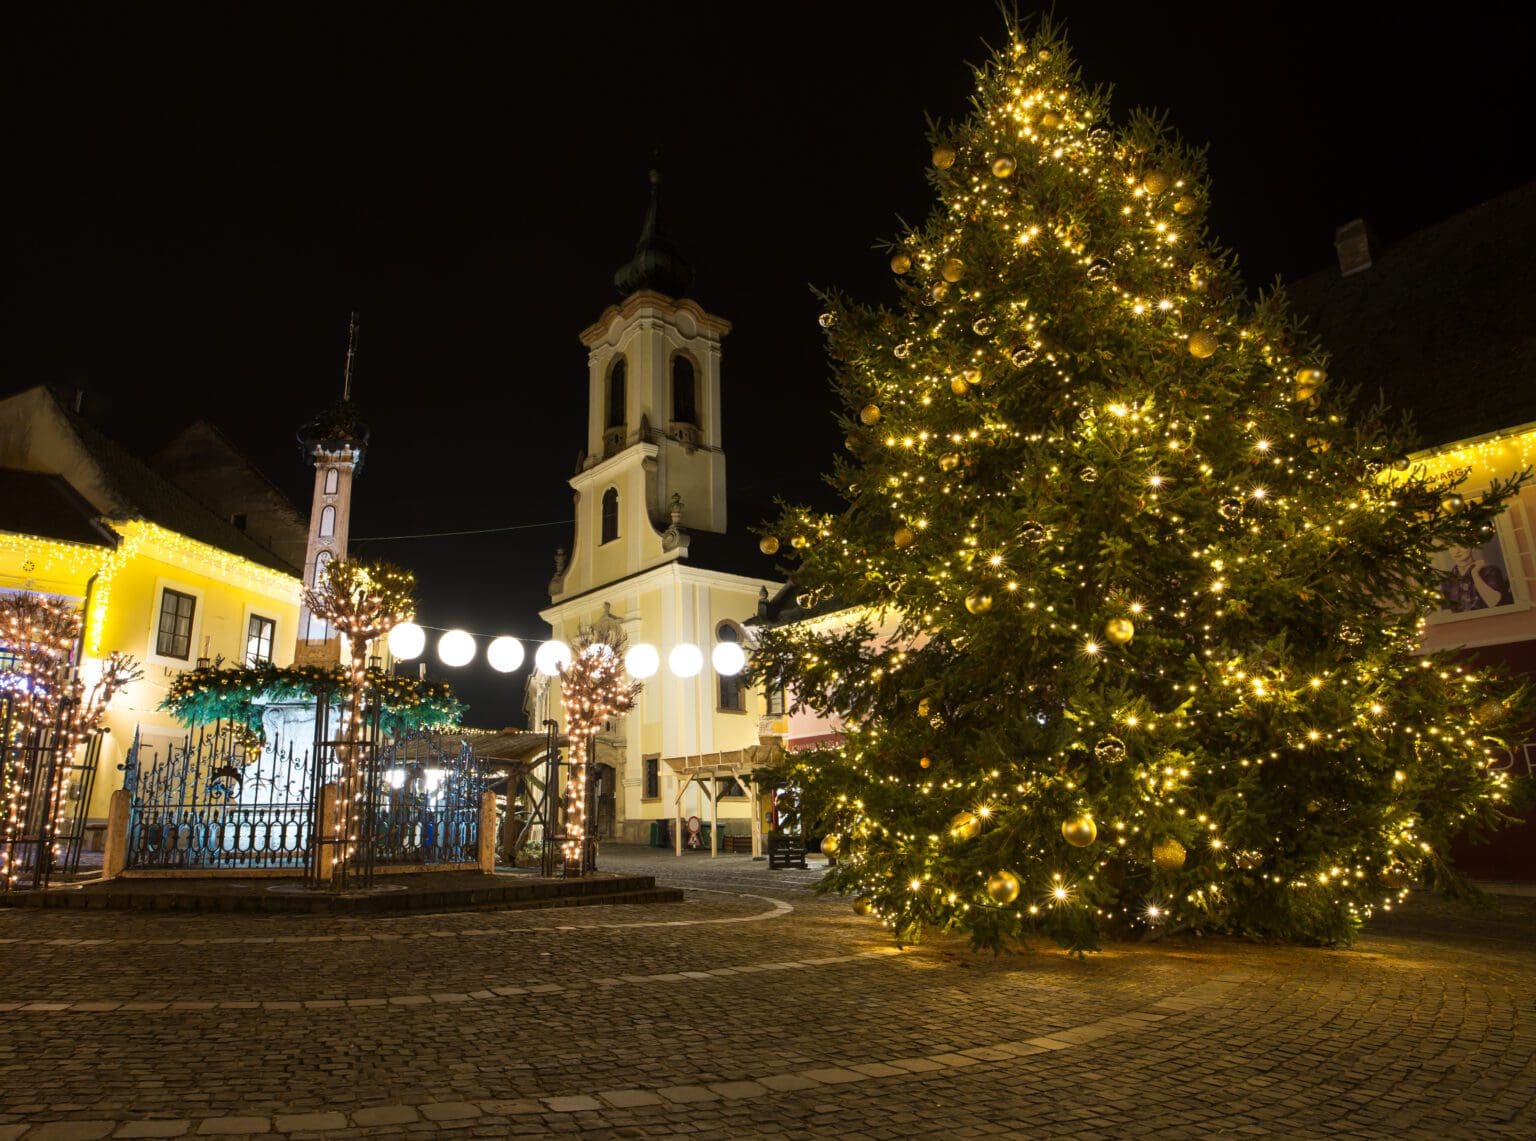 A Day Trip to Szentendre During the Winter Holidays